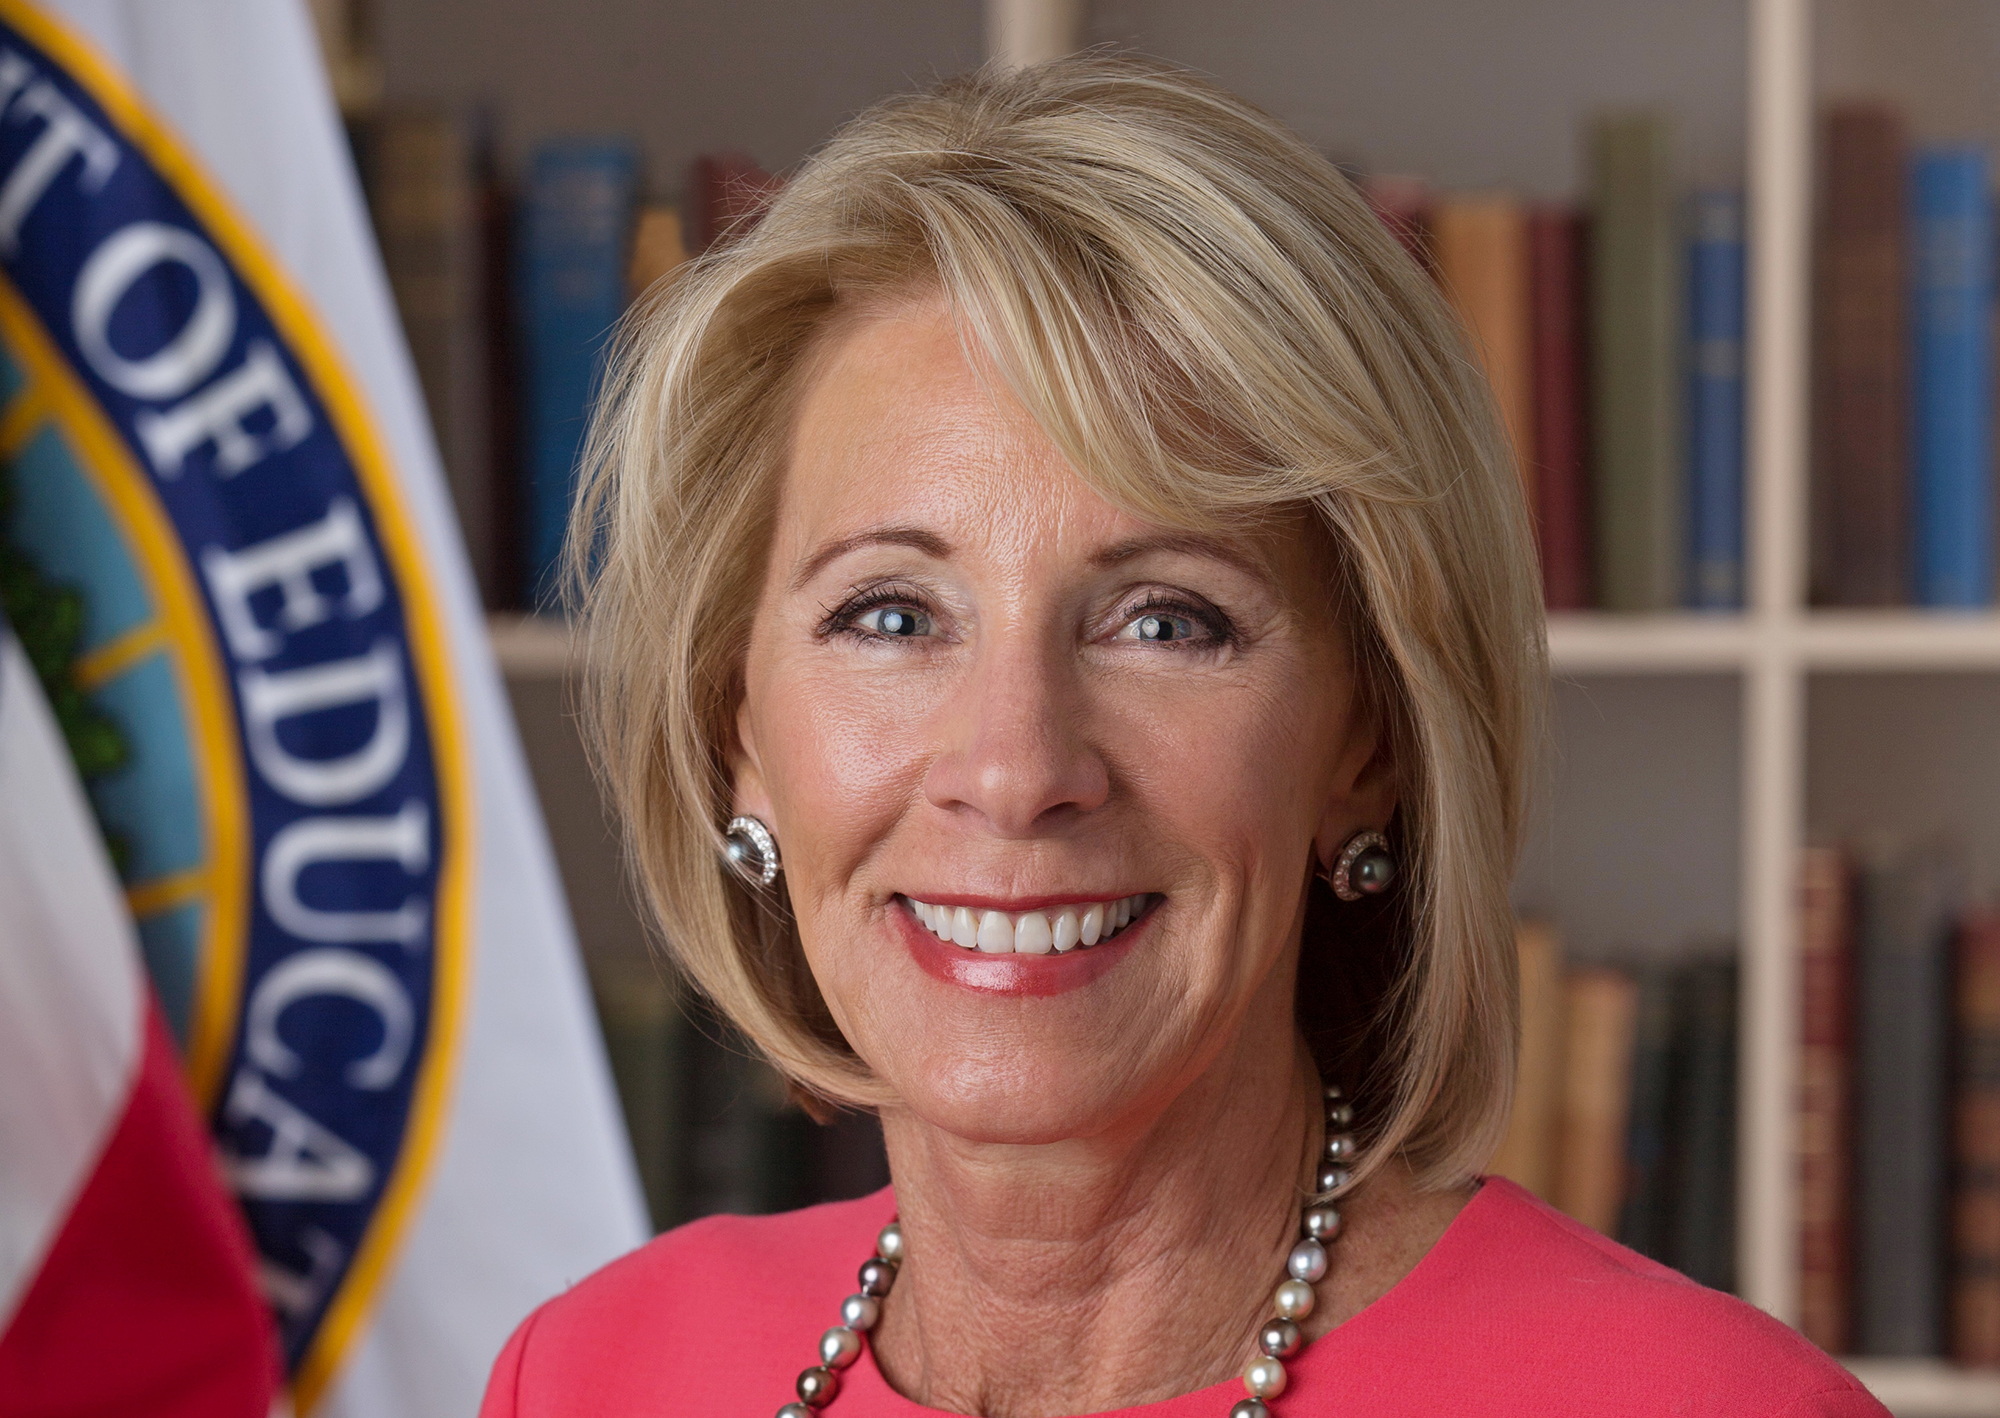 Education Secretary Betsy DeVos Will Allow For-Profit Schools To Continue Offering Programs That Don’t Meet Standards